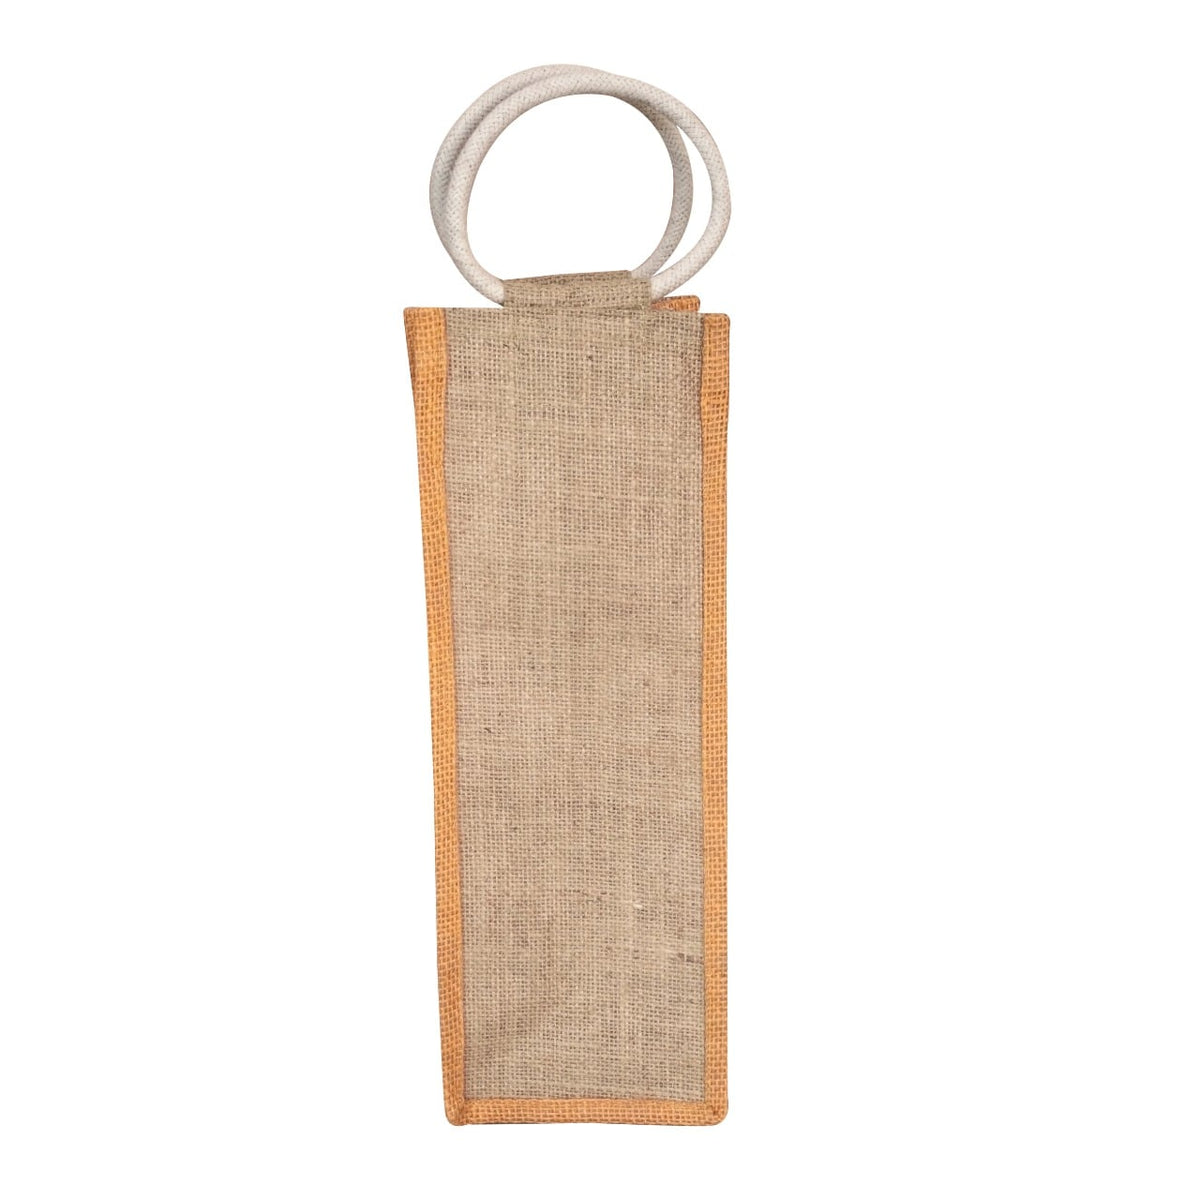 jute water bottle bag, sustainable, product size 14″”x 5 x″4.5, protection from strains and scratches